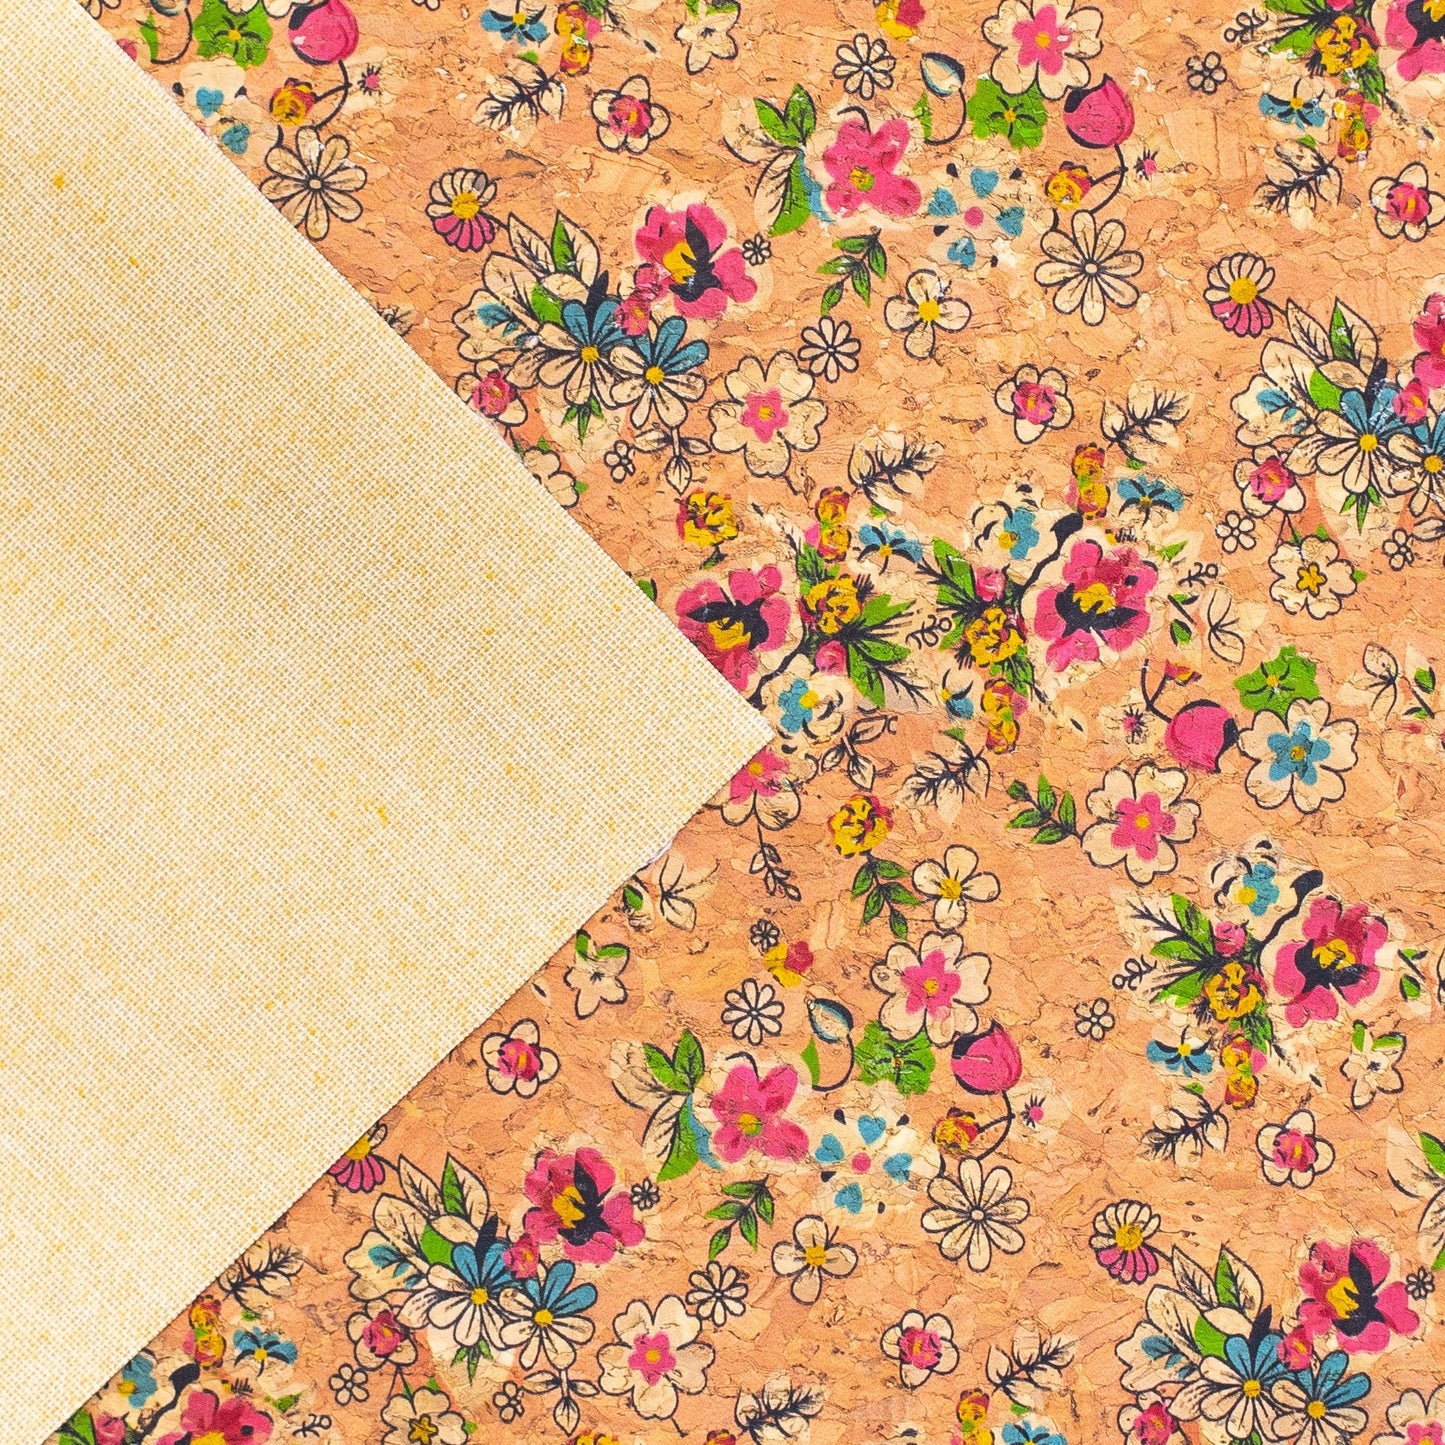 Floral Bunch Vegan Cork Fabric | THE CORK COLLECTION